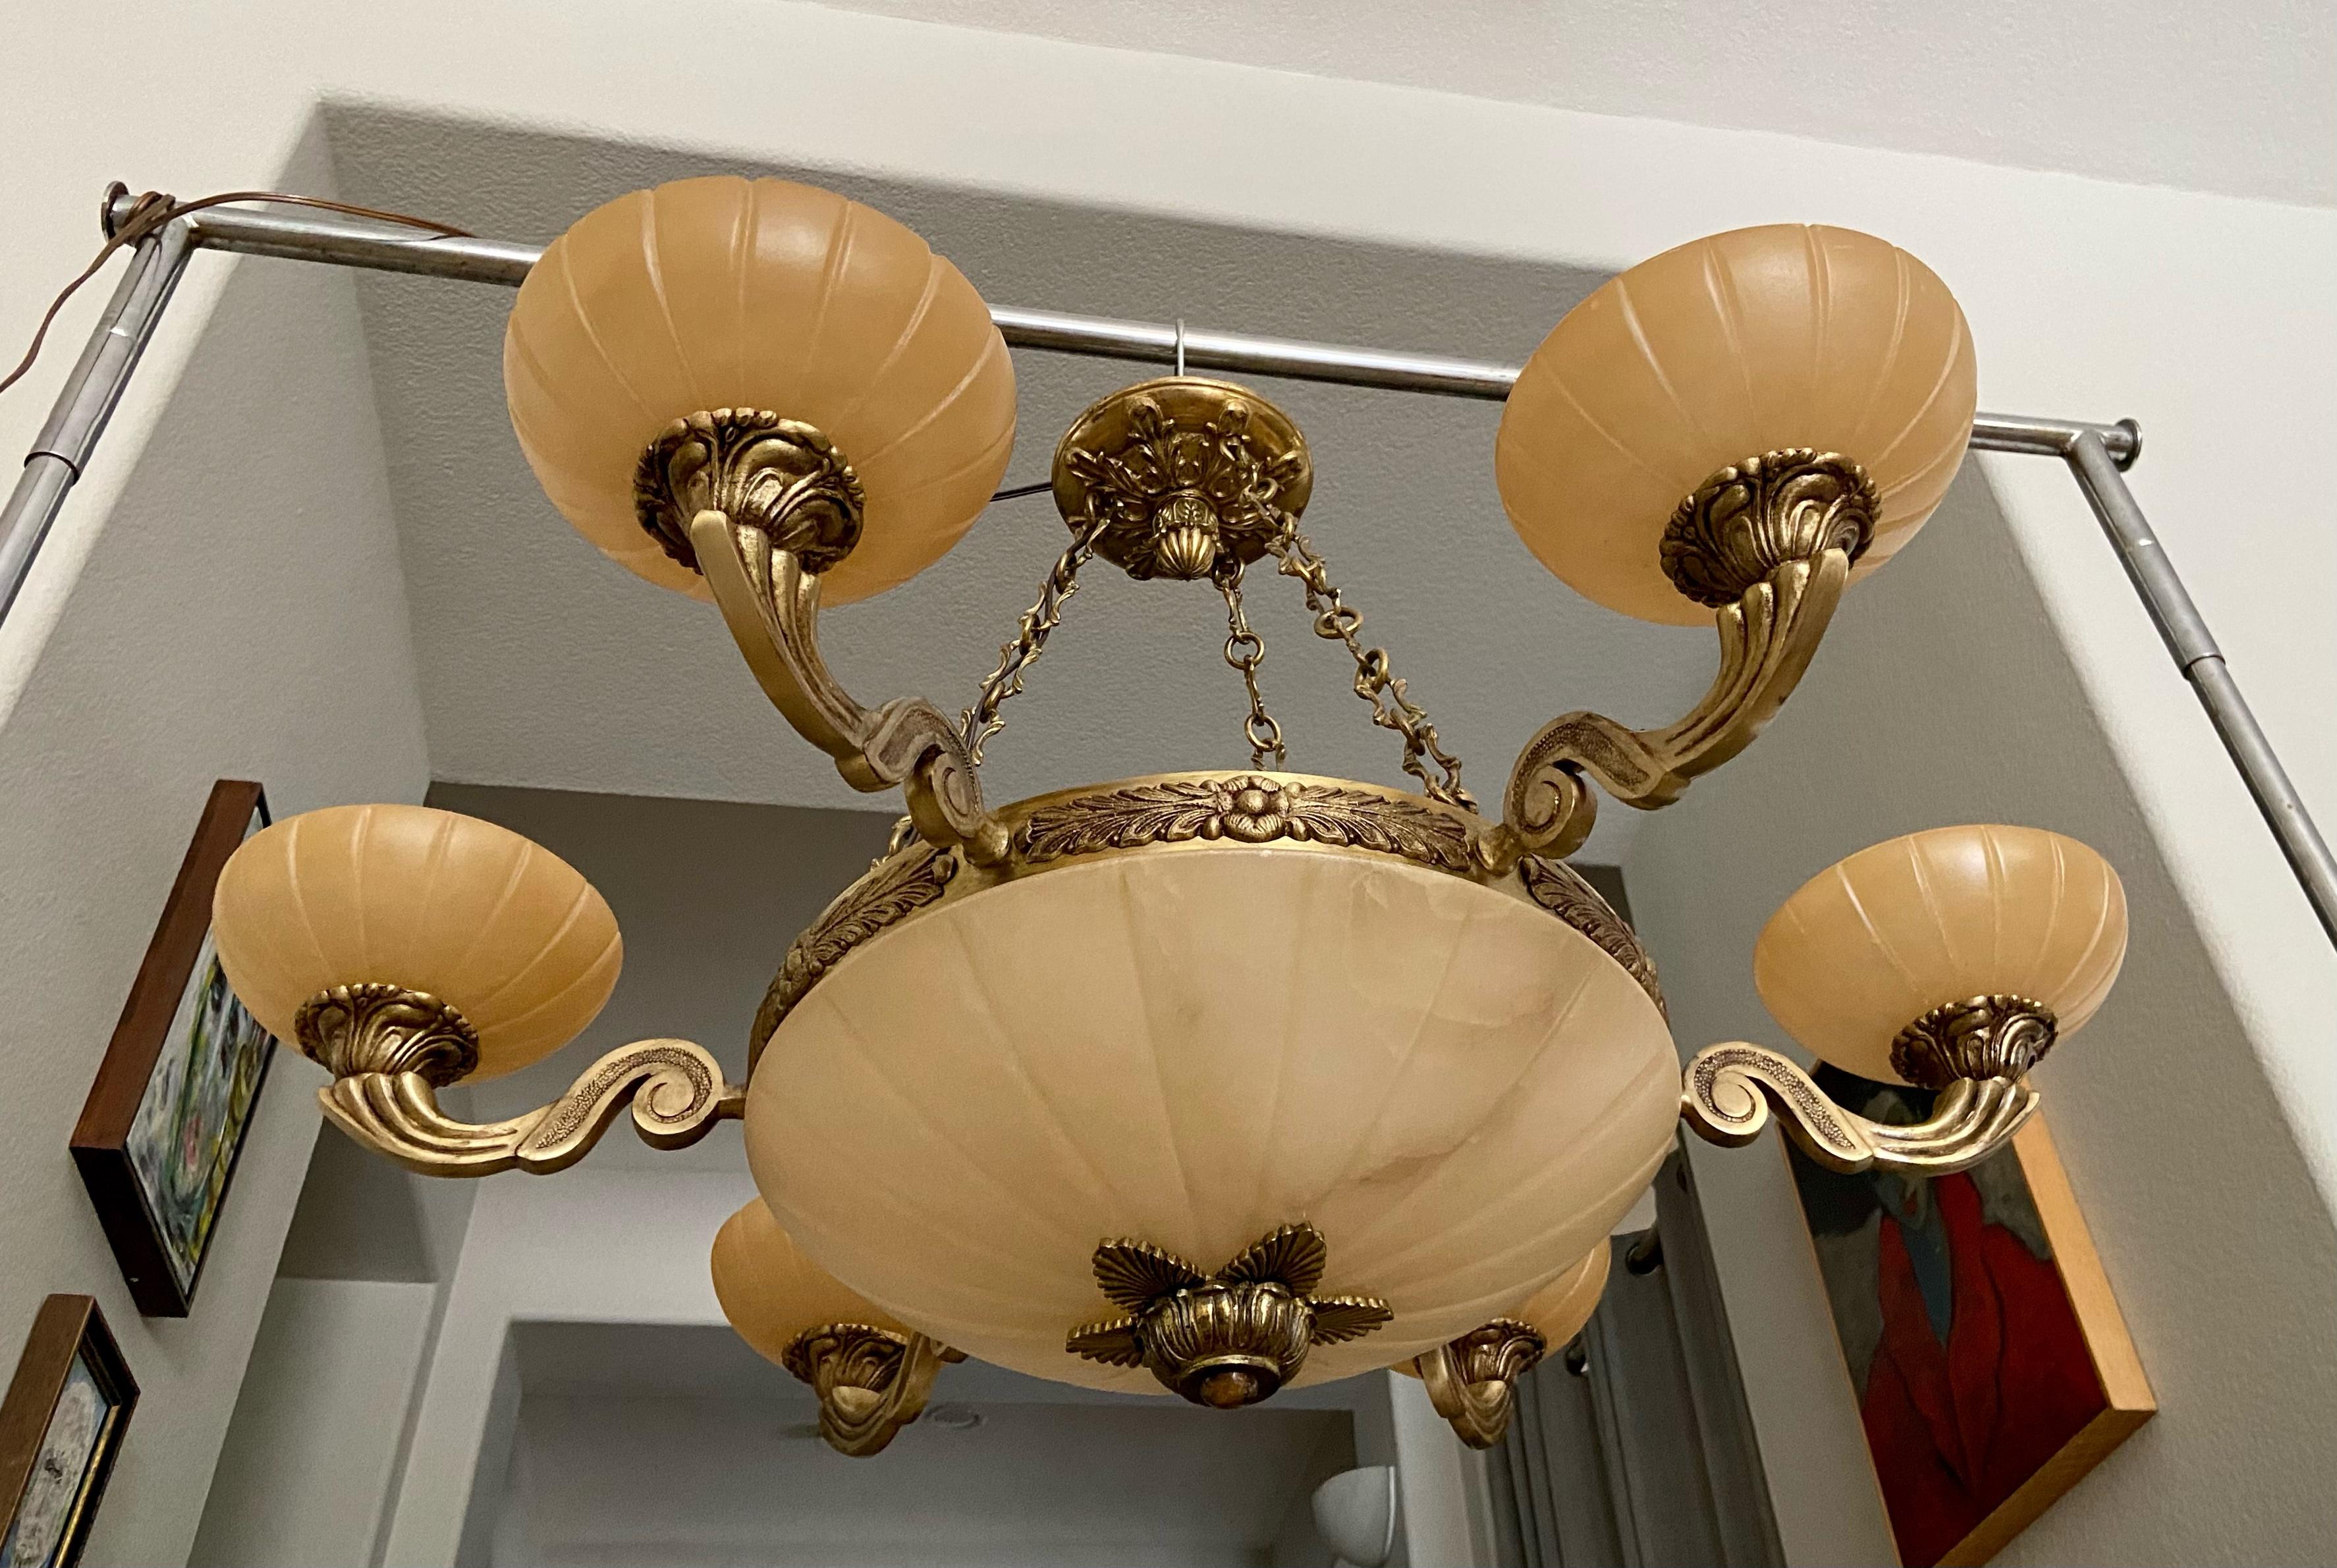 French style alabaster 6 arm chandelier with brass fittings, chain and ceiling cap. The alabaster stone is pale tan with nice veining detailing. Fixture uses 9 candelabra B base bulbs (3 main large bowl, one each 6 arms). Overall diameter 35